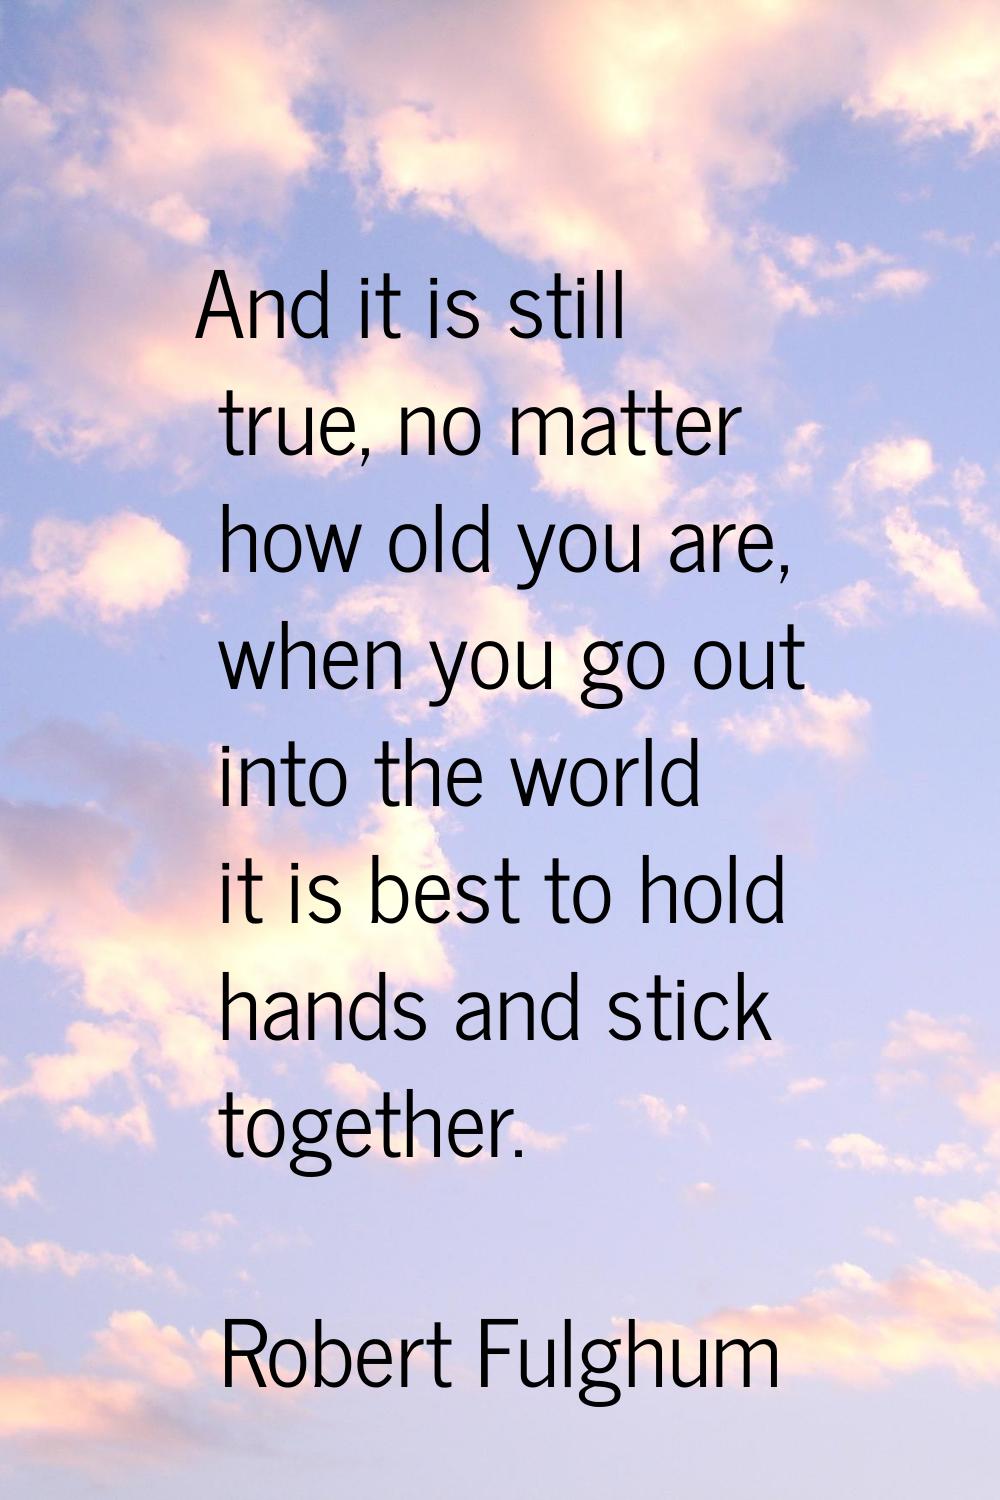 And it is still true, no matter how old you are, when you go out into the world it is best to hold 